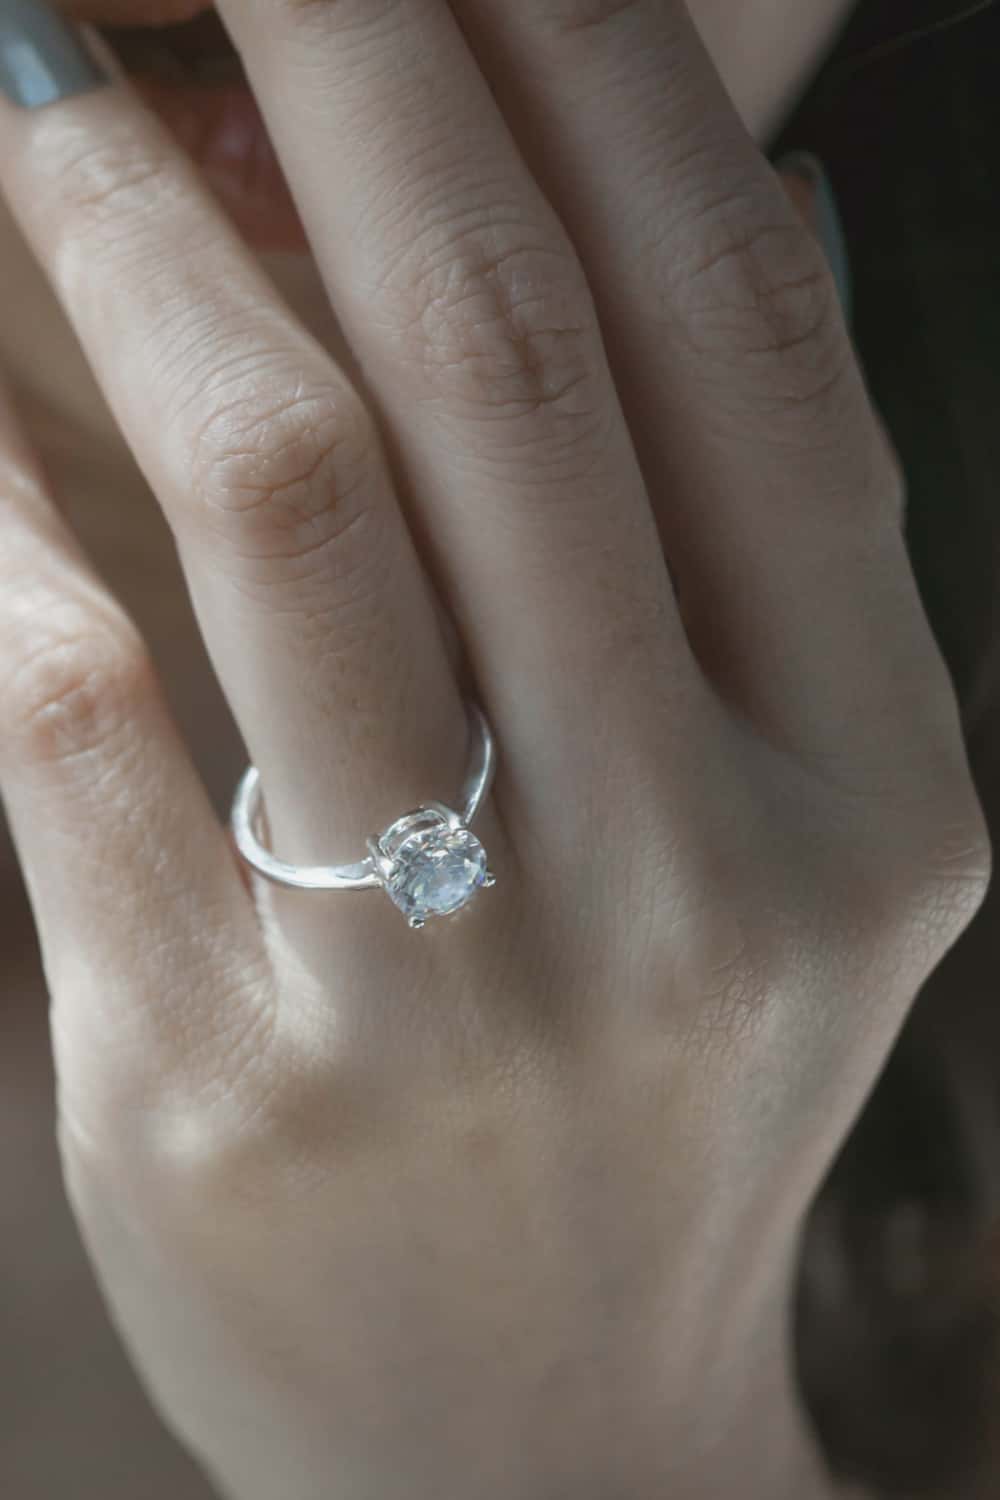 Tips for Engagement Ring Care